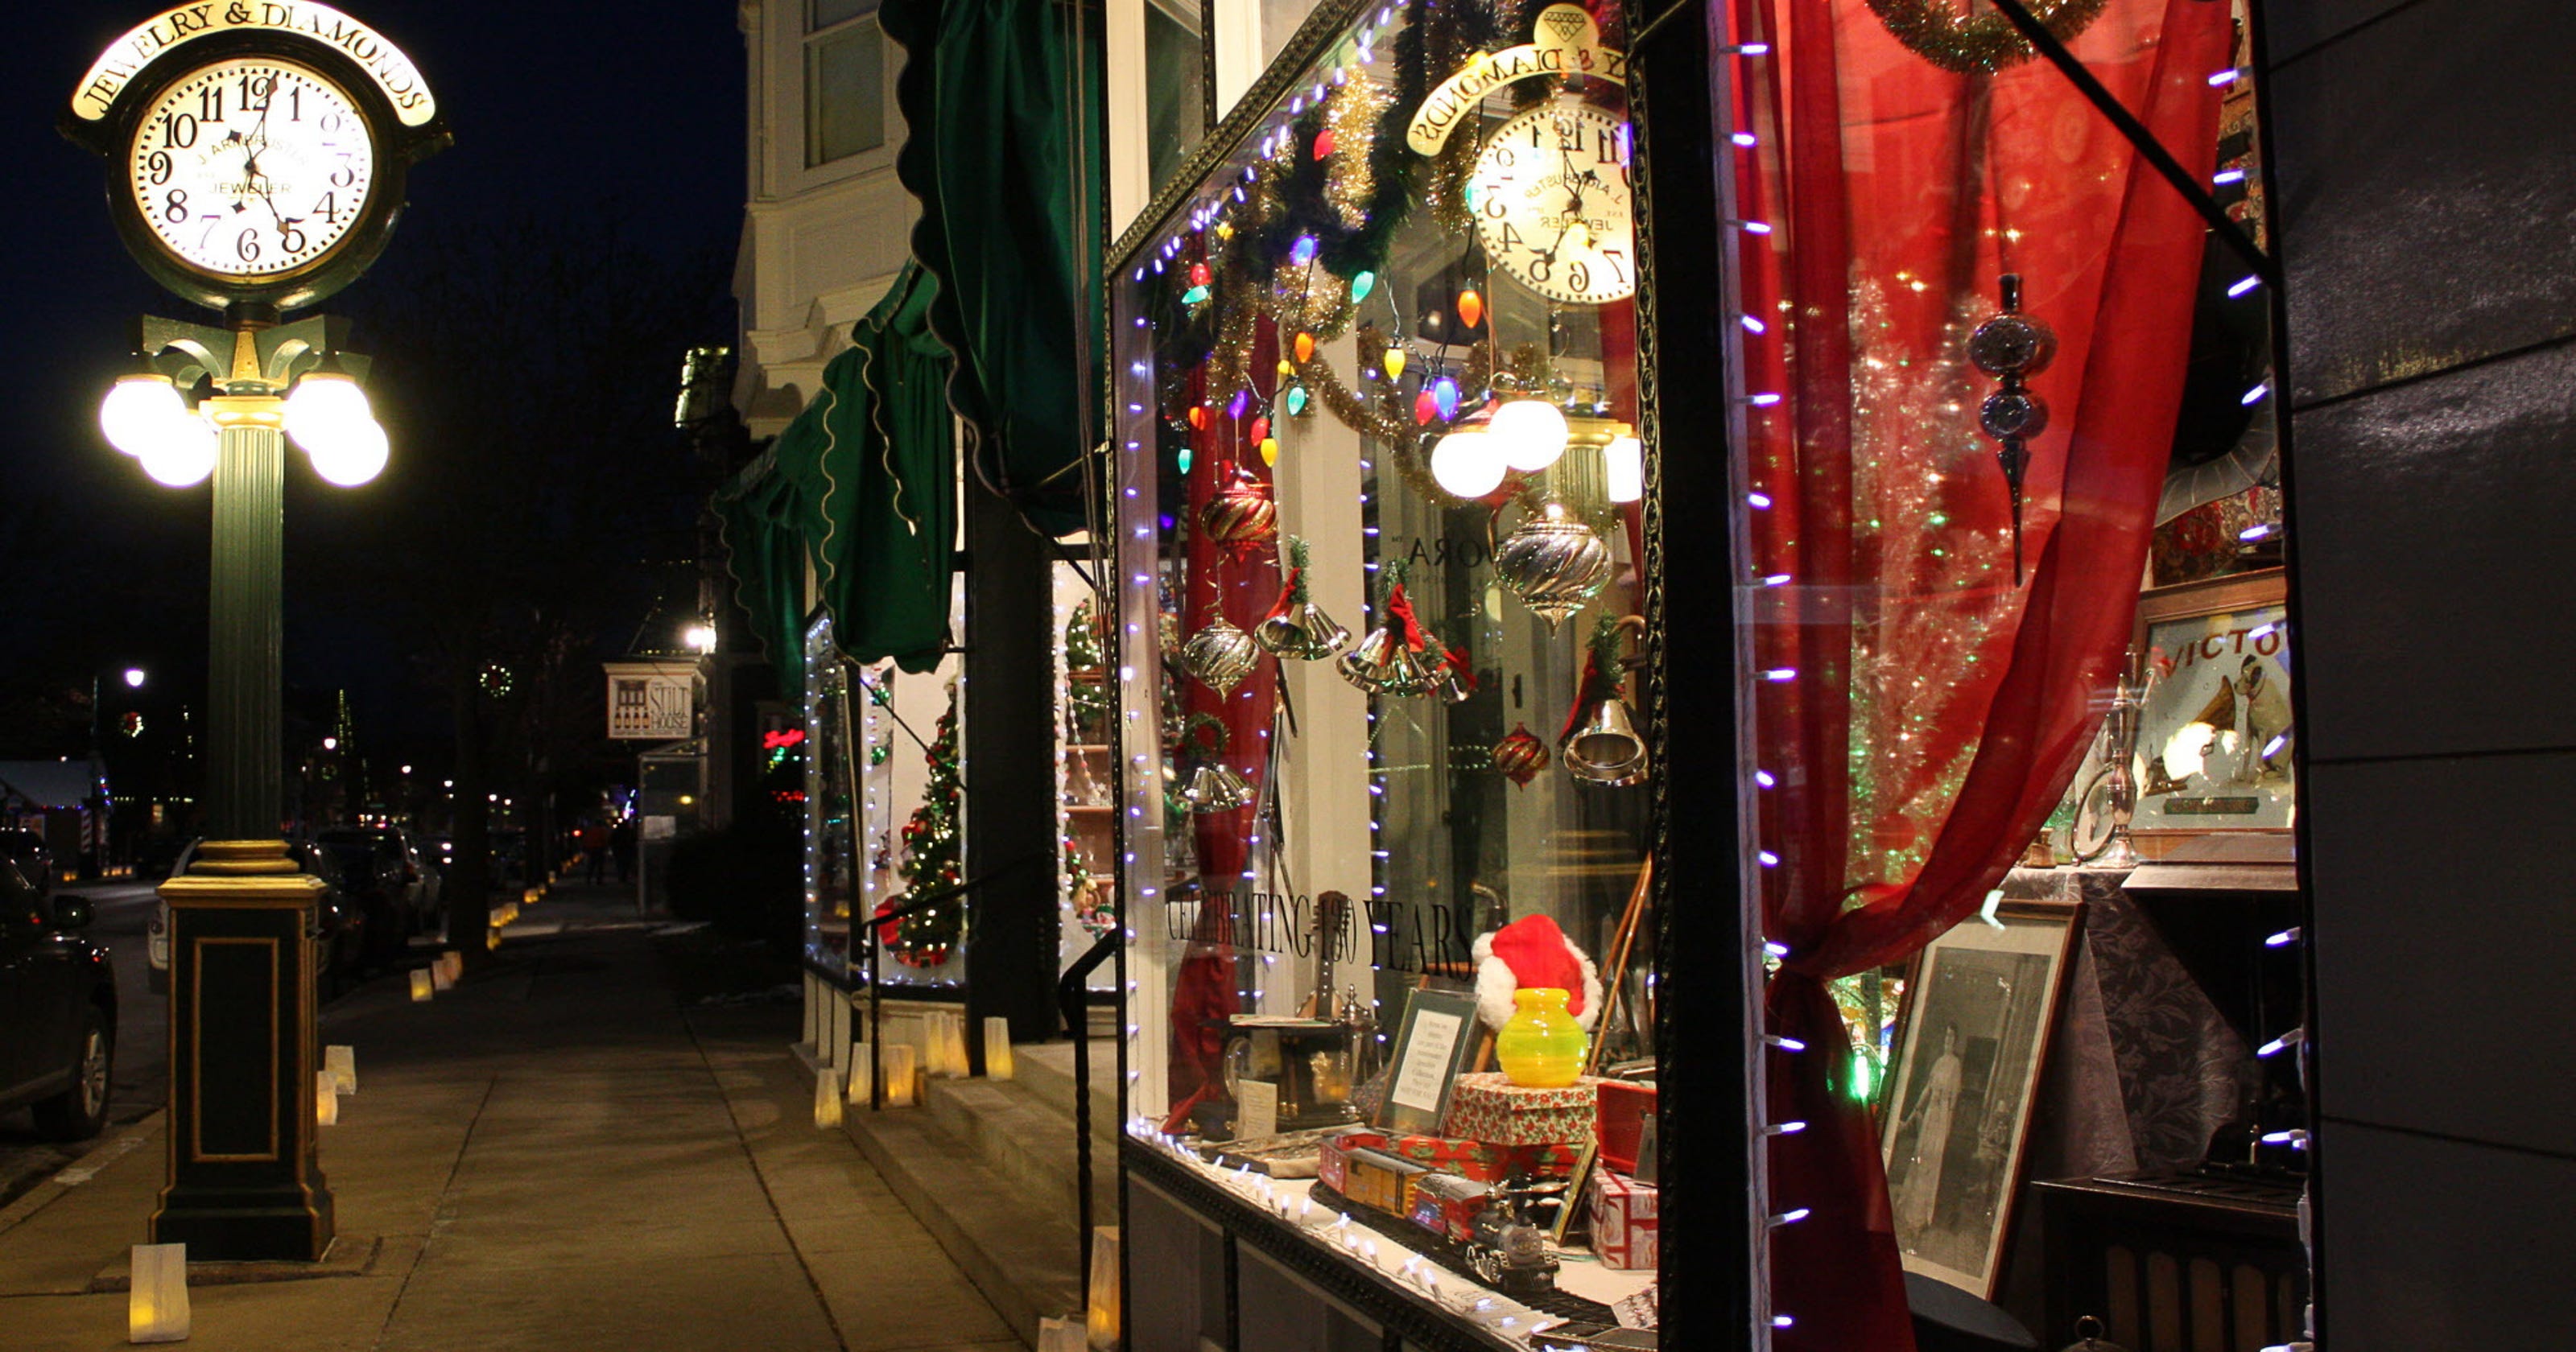 5 Hallmark-worthy Wisconsin small towns to visit during the holidays3200 x 1680